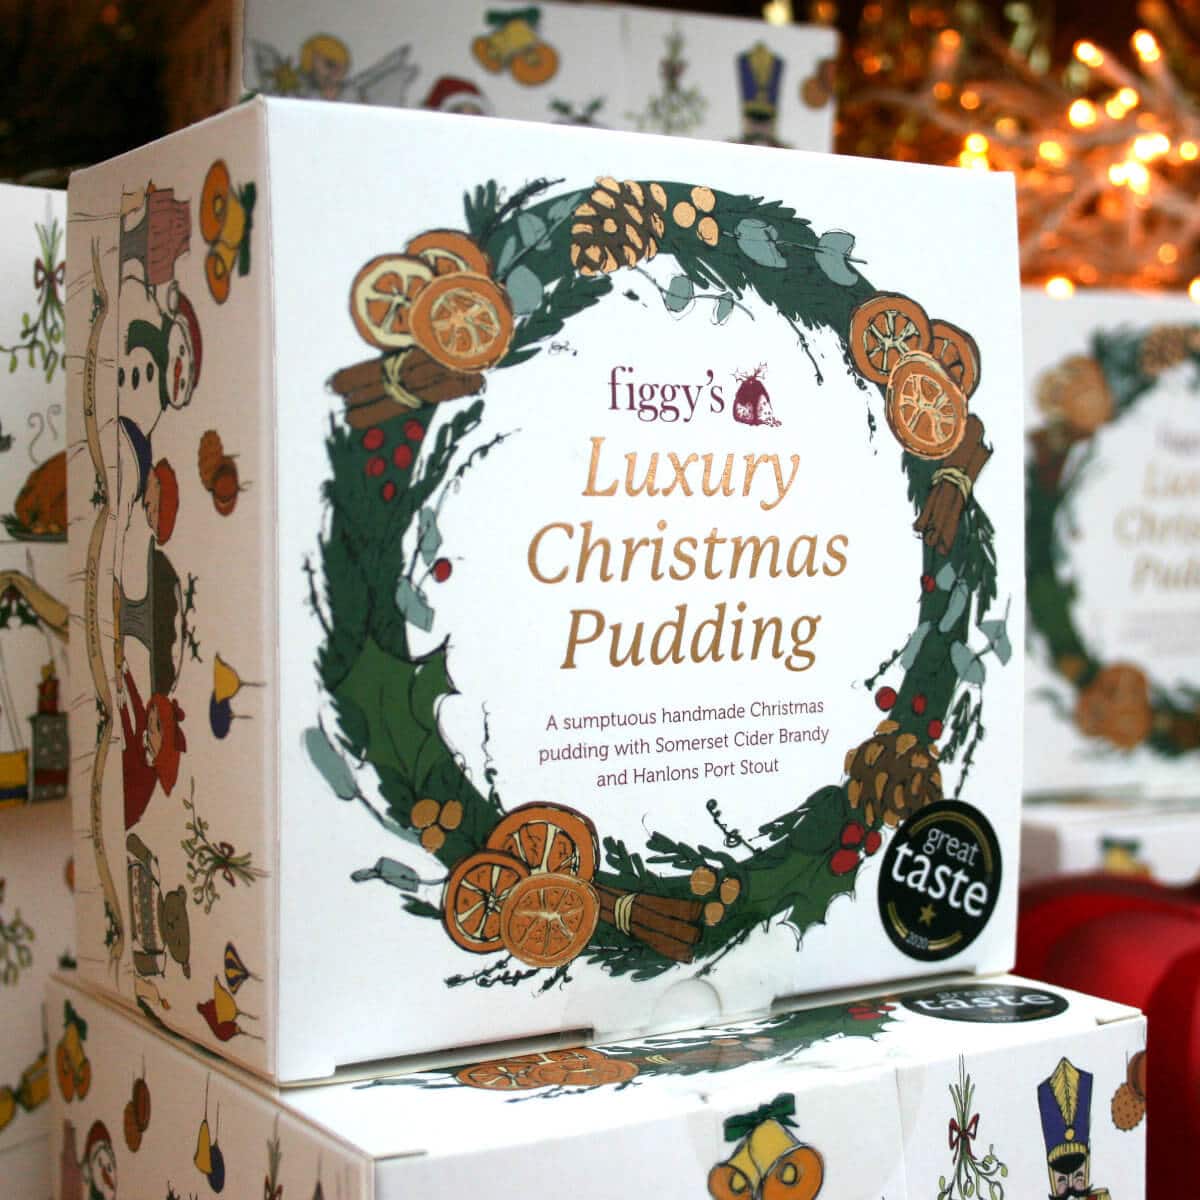 Figgy's Luxury Christmas Pudding retail packaging